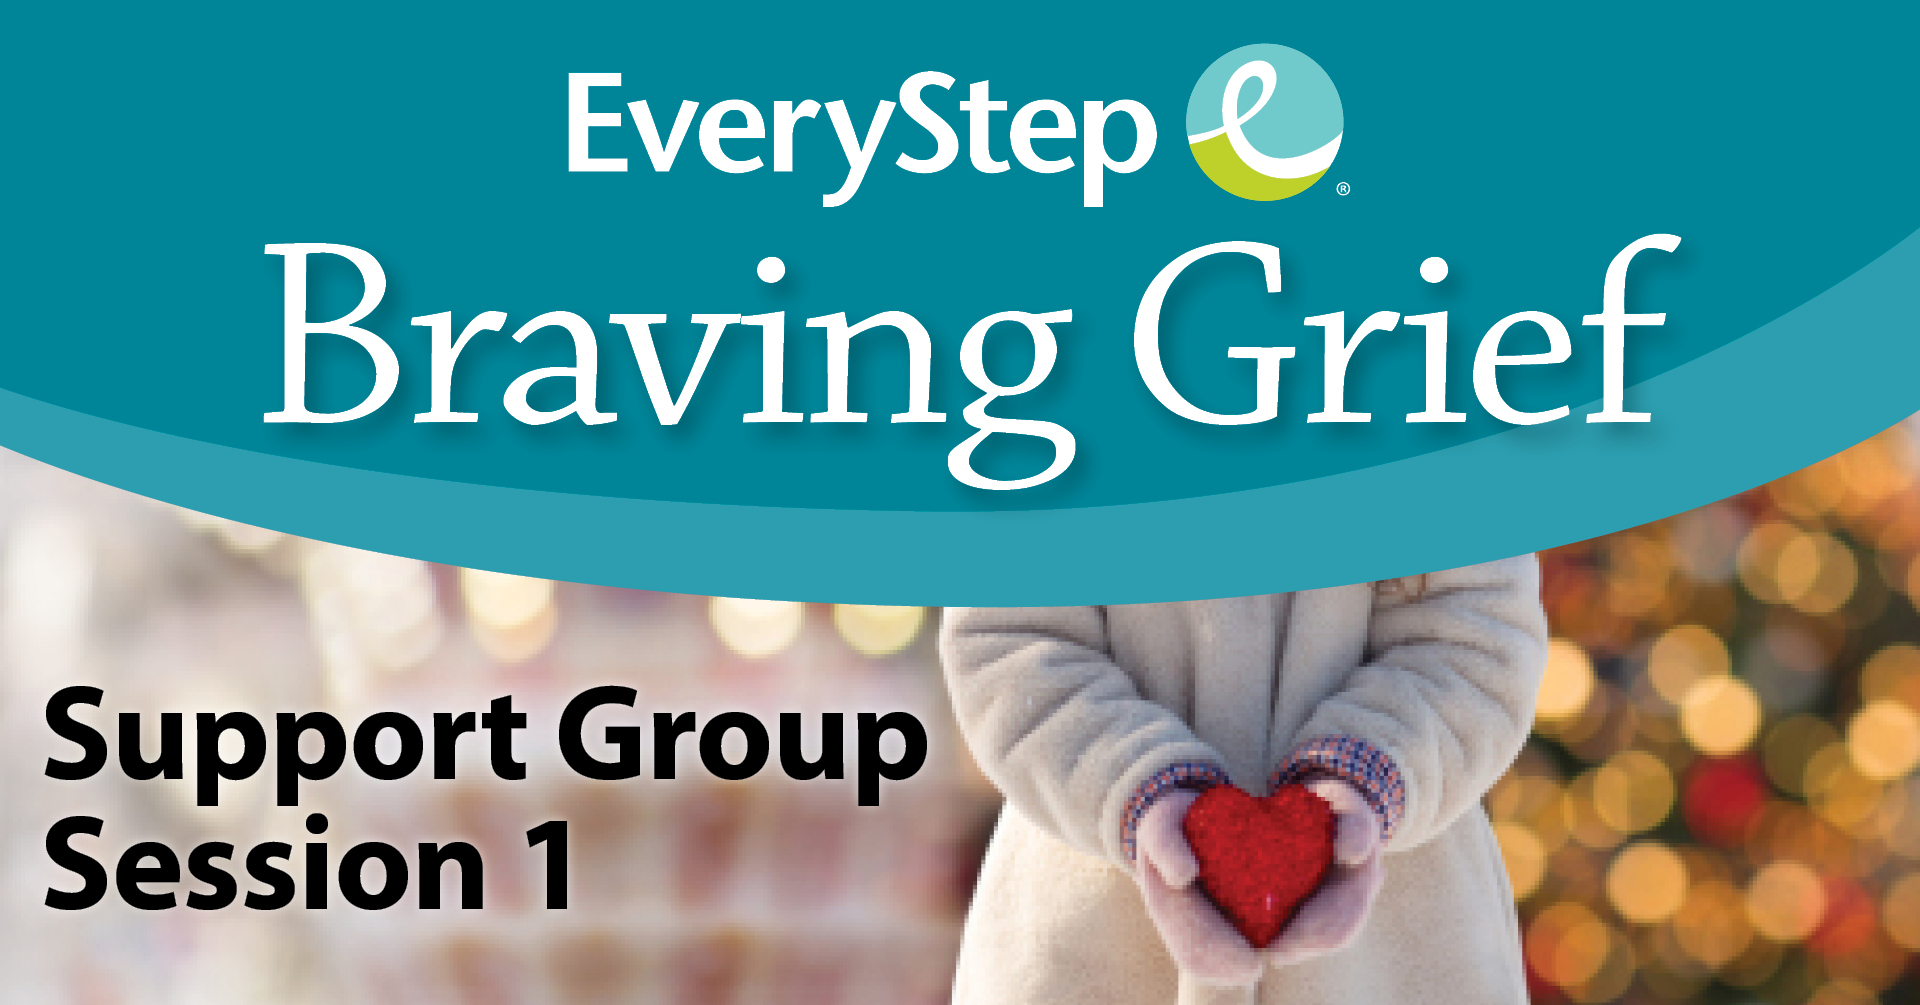 Braving Grief Support Group